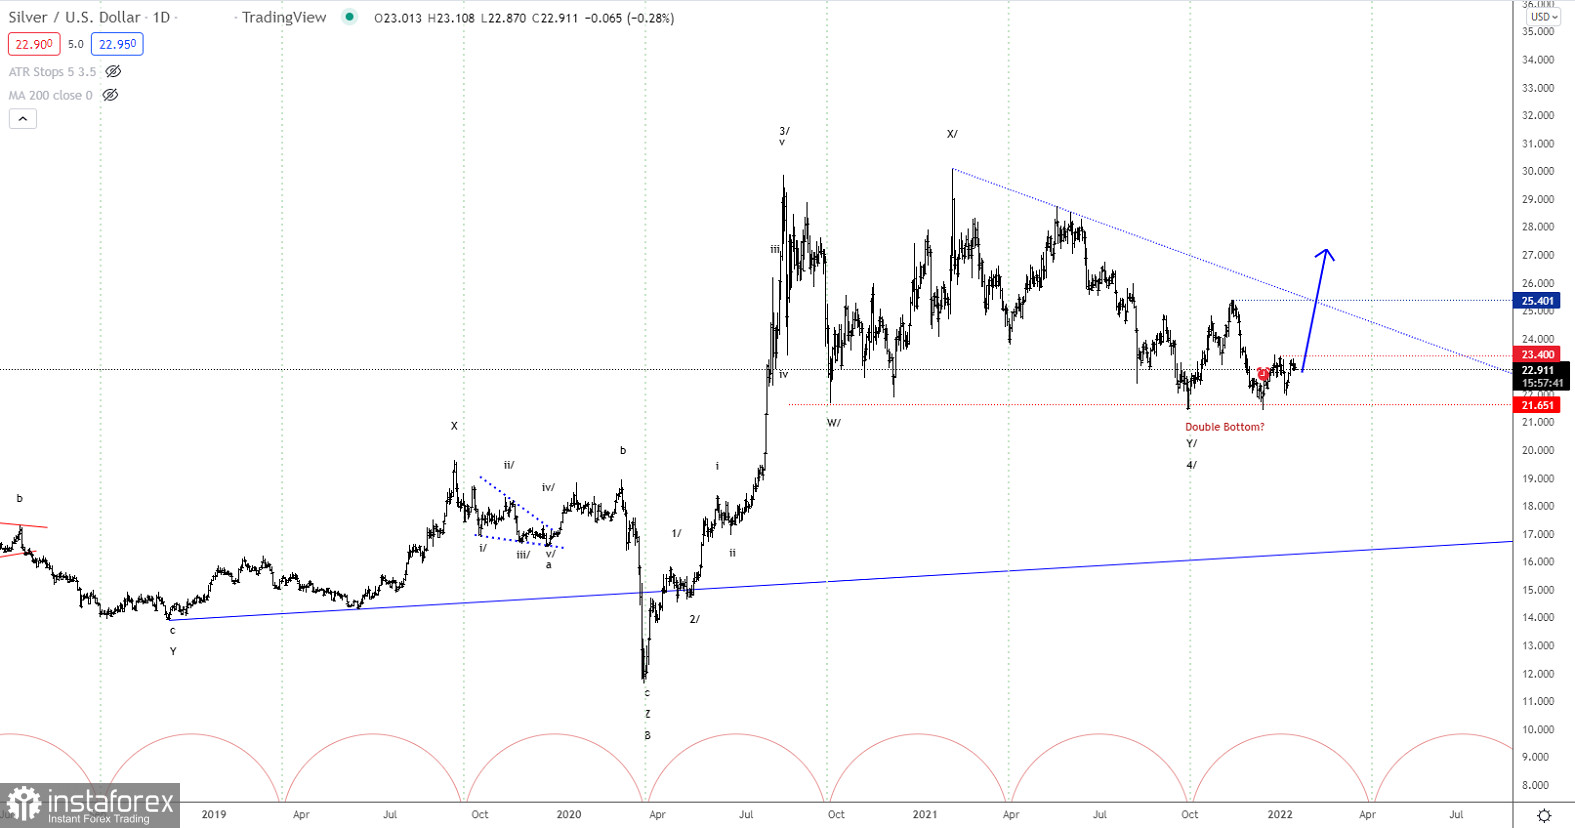 Elliott wave analysis of Silver for January 18, 2022 